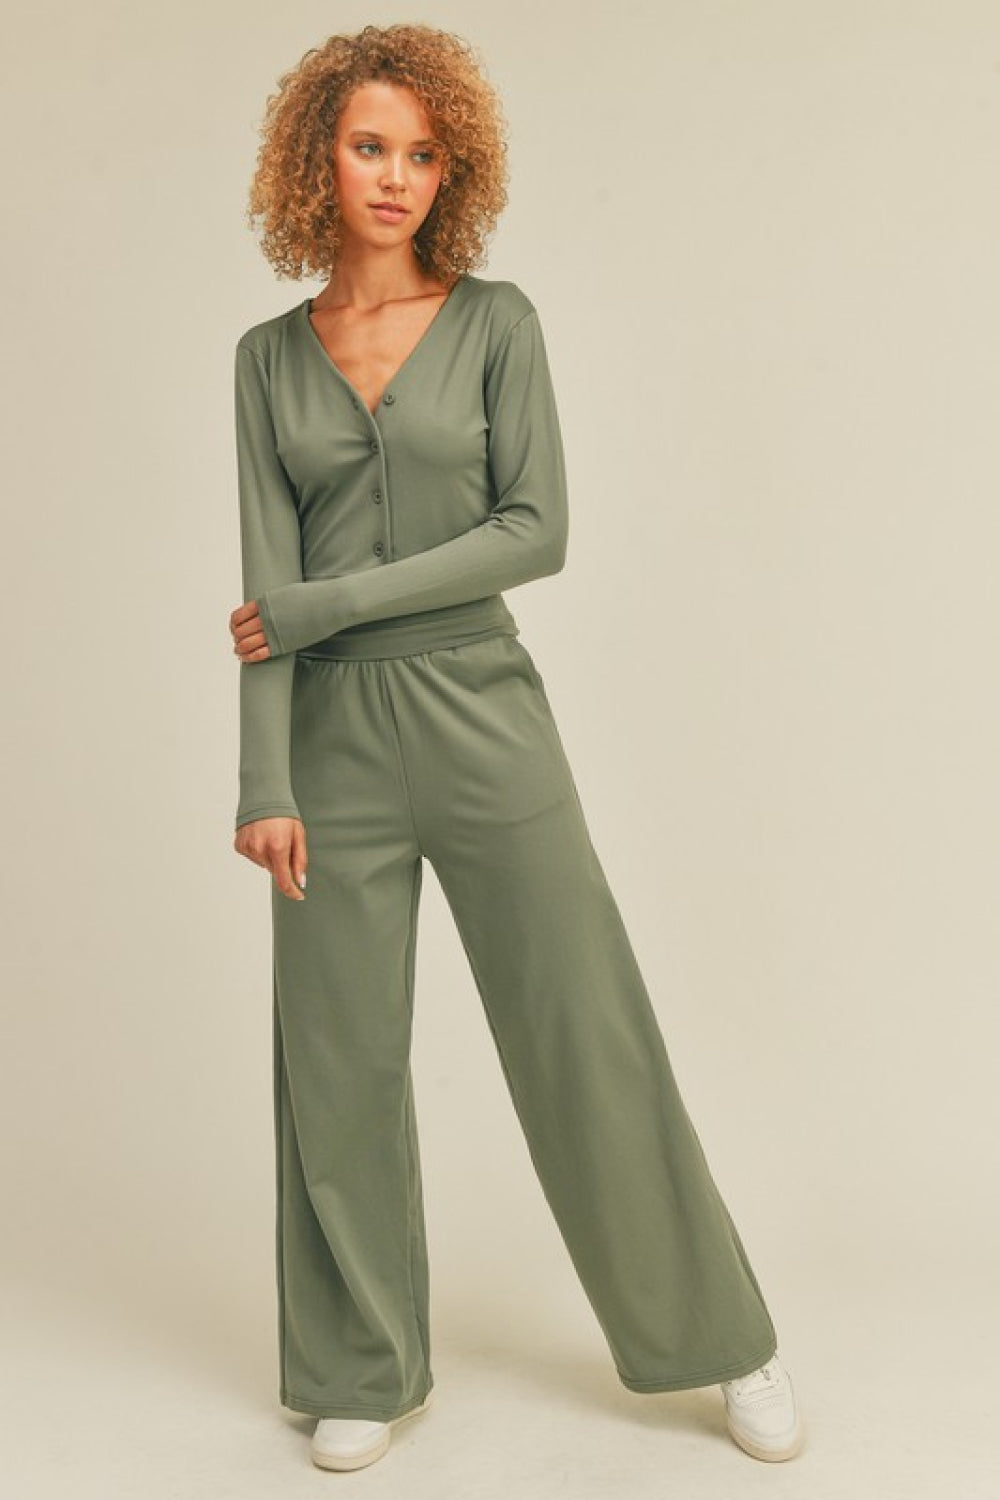 Kimberly C V-Neck Buttoned Top and Wide Waistband Wide Leg Pants Set